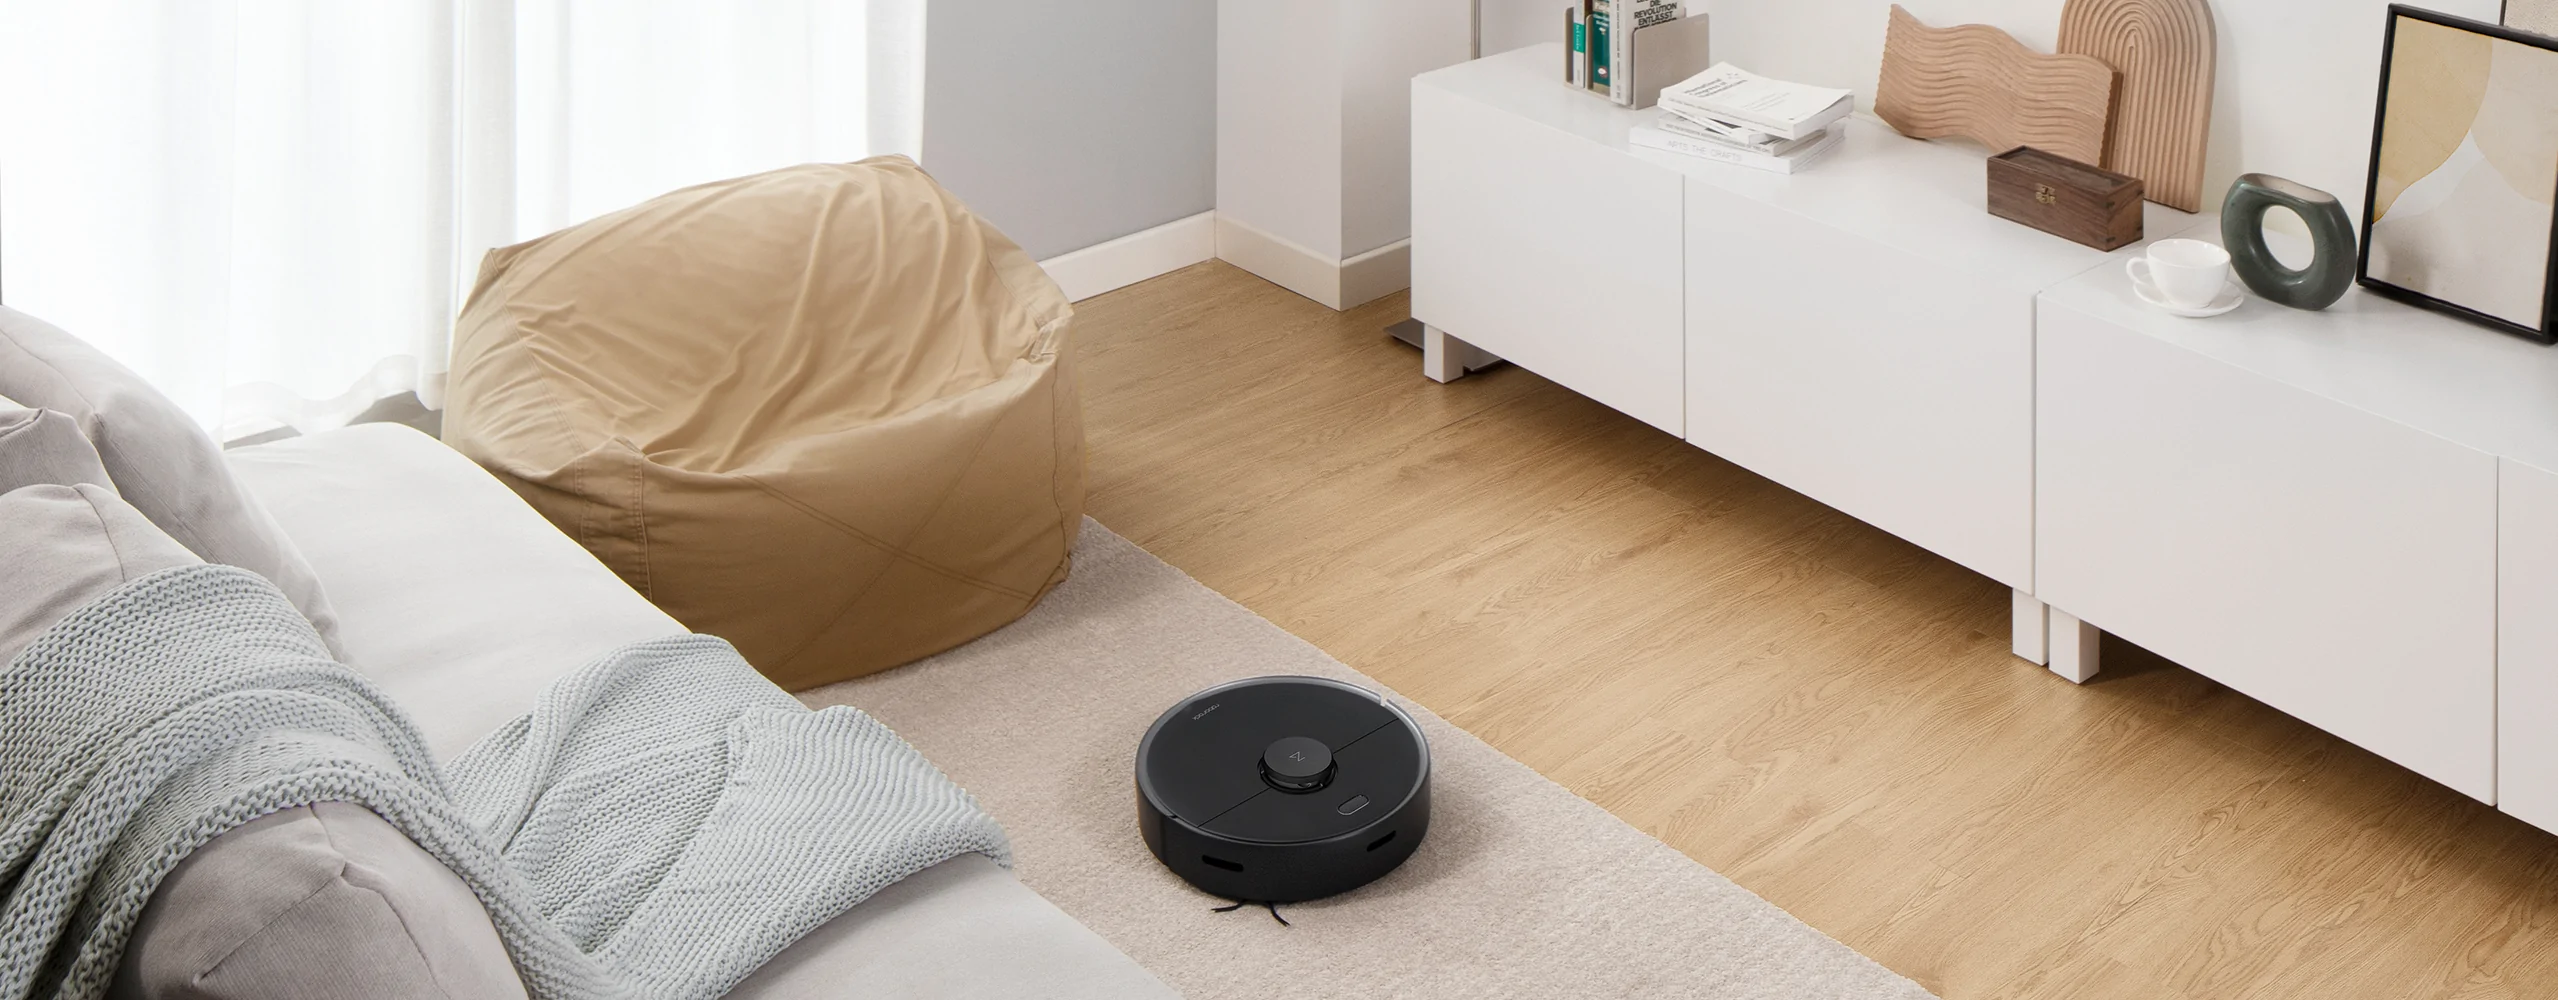 Roborock S4 Max Room Cleaner Robot Review